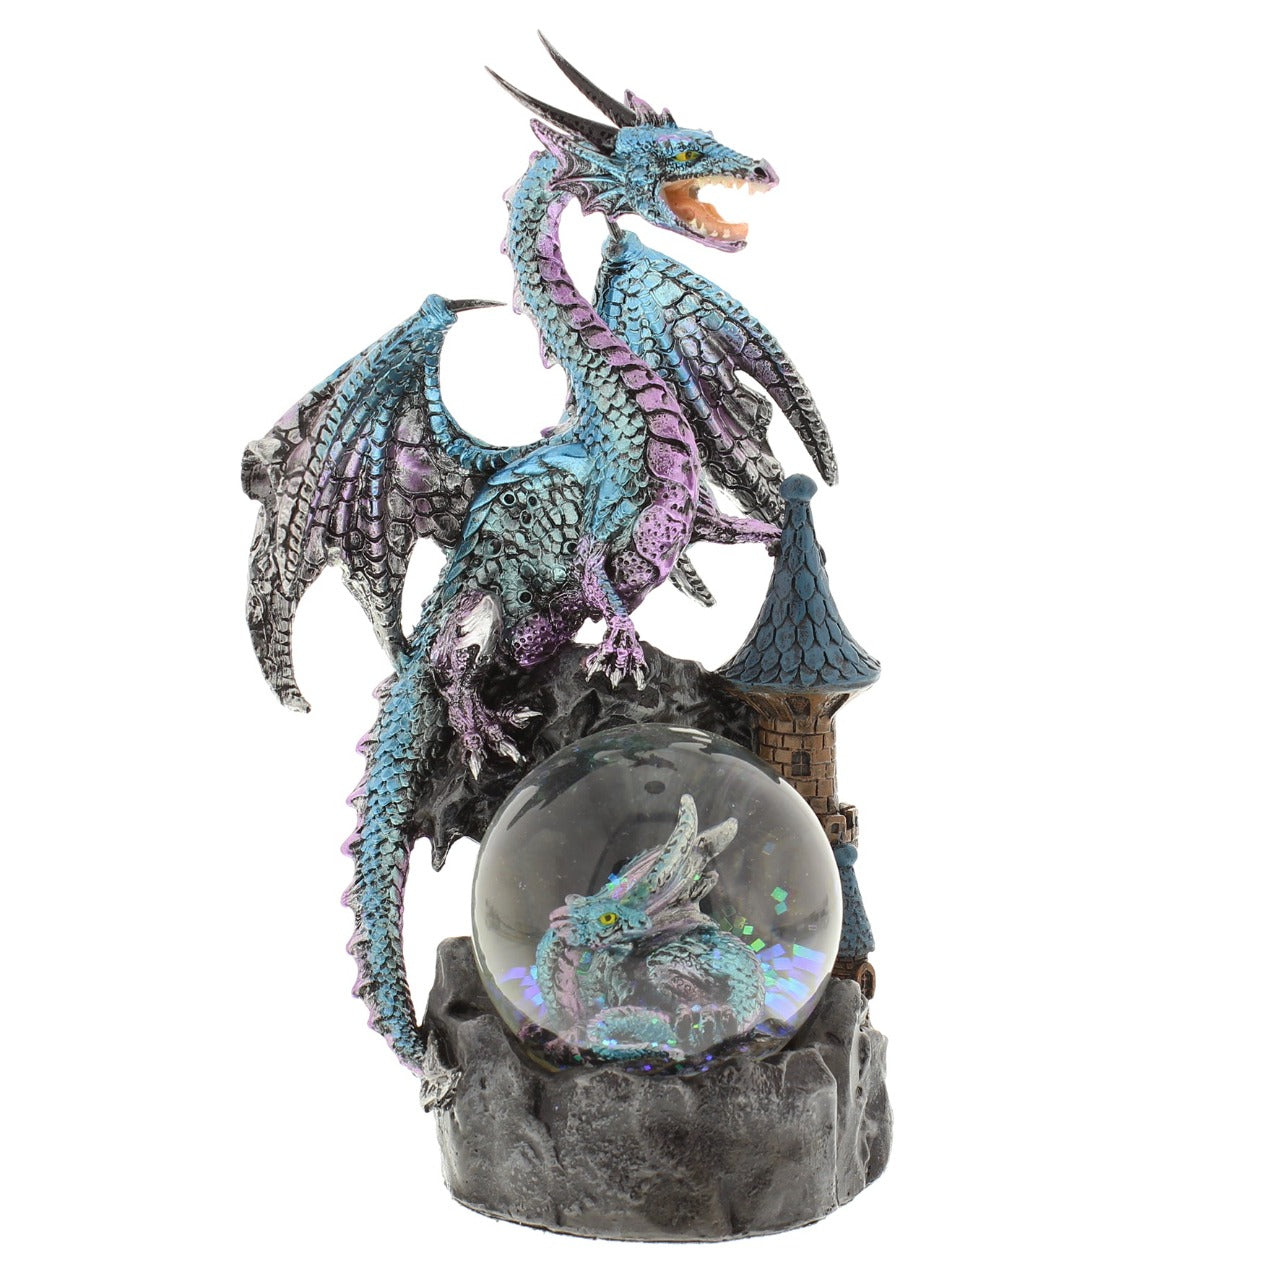 Mystic Legends Blue Dragon Snow Globe by Juliana  An epic dragon figurine that will bring a stunning element of fantasy to a mantel, bookcase or tabletop. Complete with metallic blue and purple scales and a mesmerizing glittering waterball with a baby dragon inside.